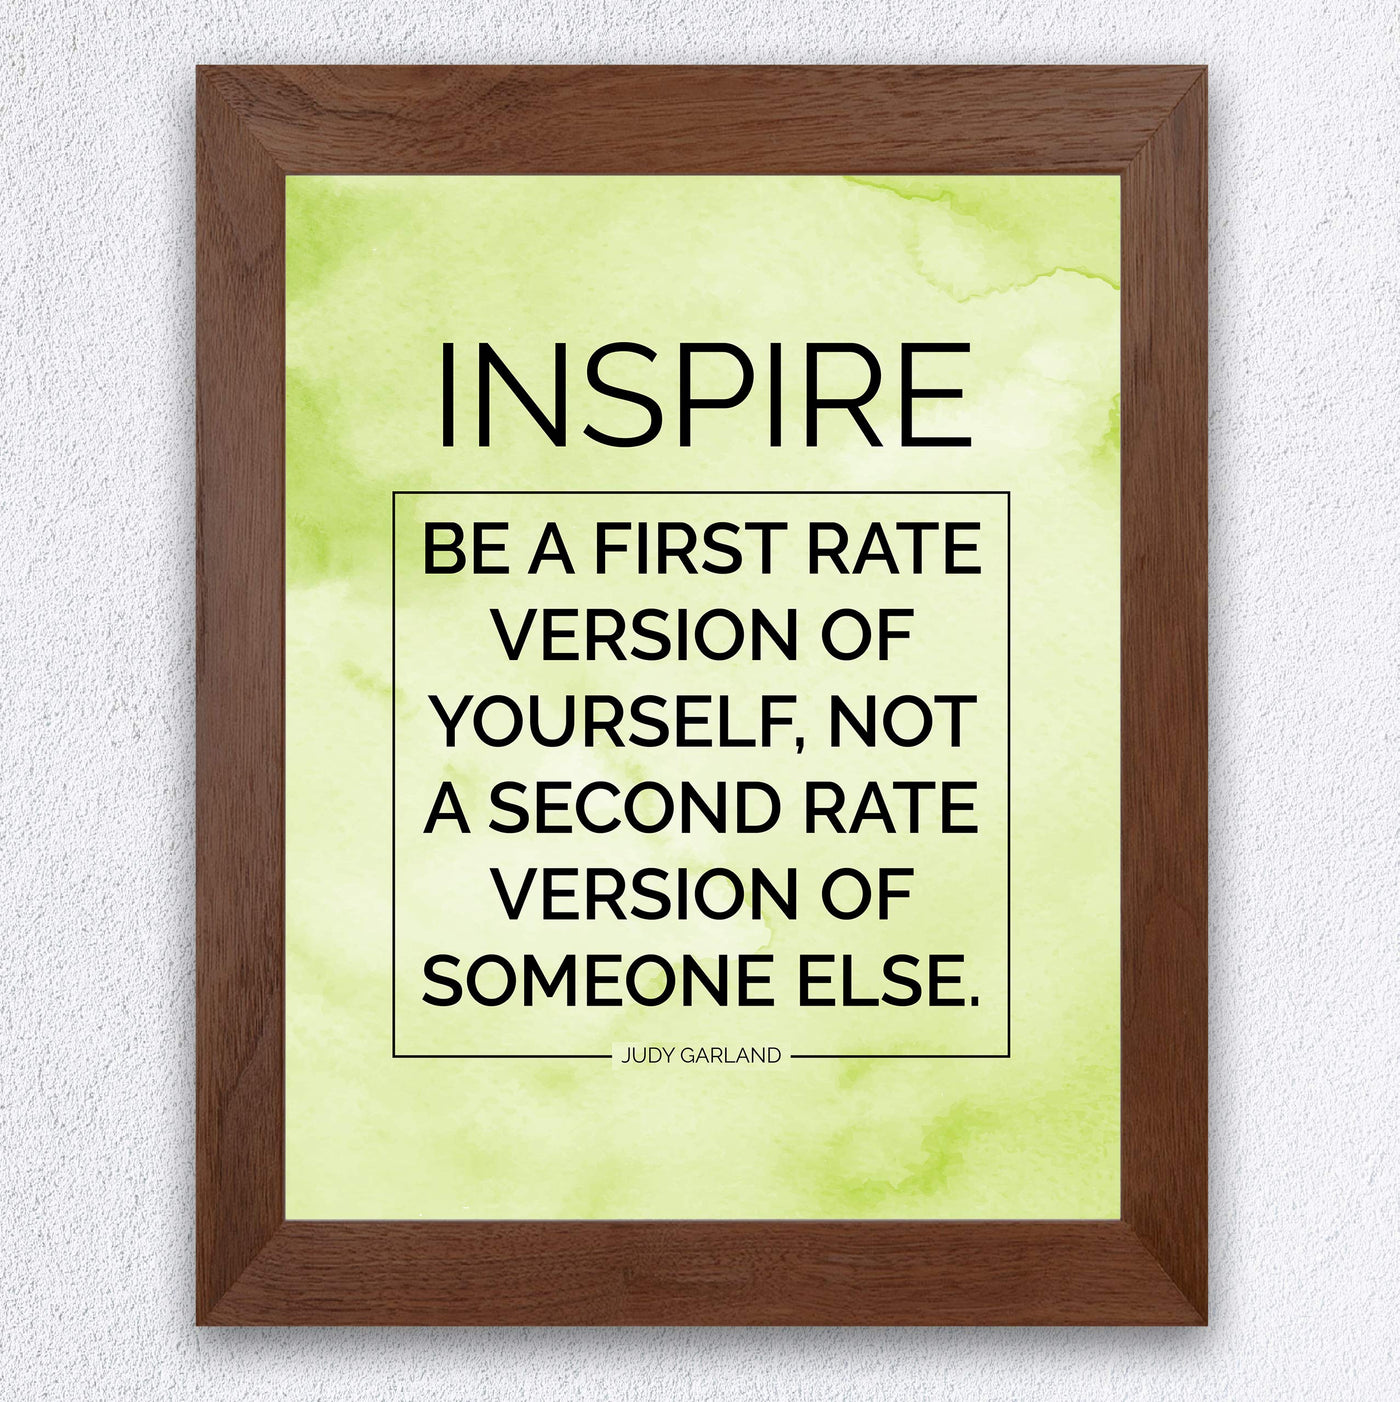 Judy Garland Quotes-"Inspire-Be a First Rate Version of Yourself" Inspirational Wall Art -8x10" Motivational Print-Ready to Frame. Home-Office-Classroom-Dorm Decor. Great Sign to Build Confidence!